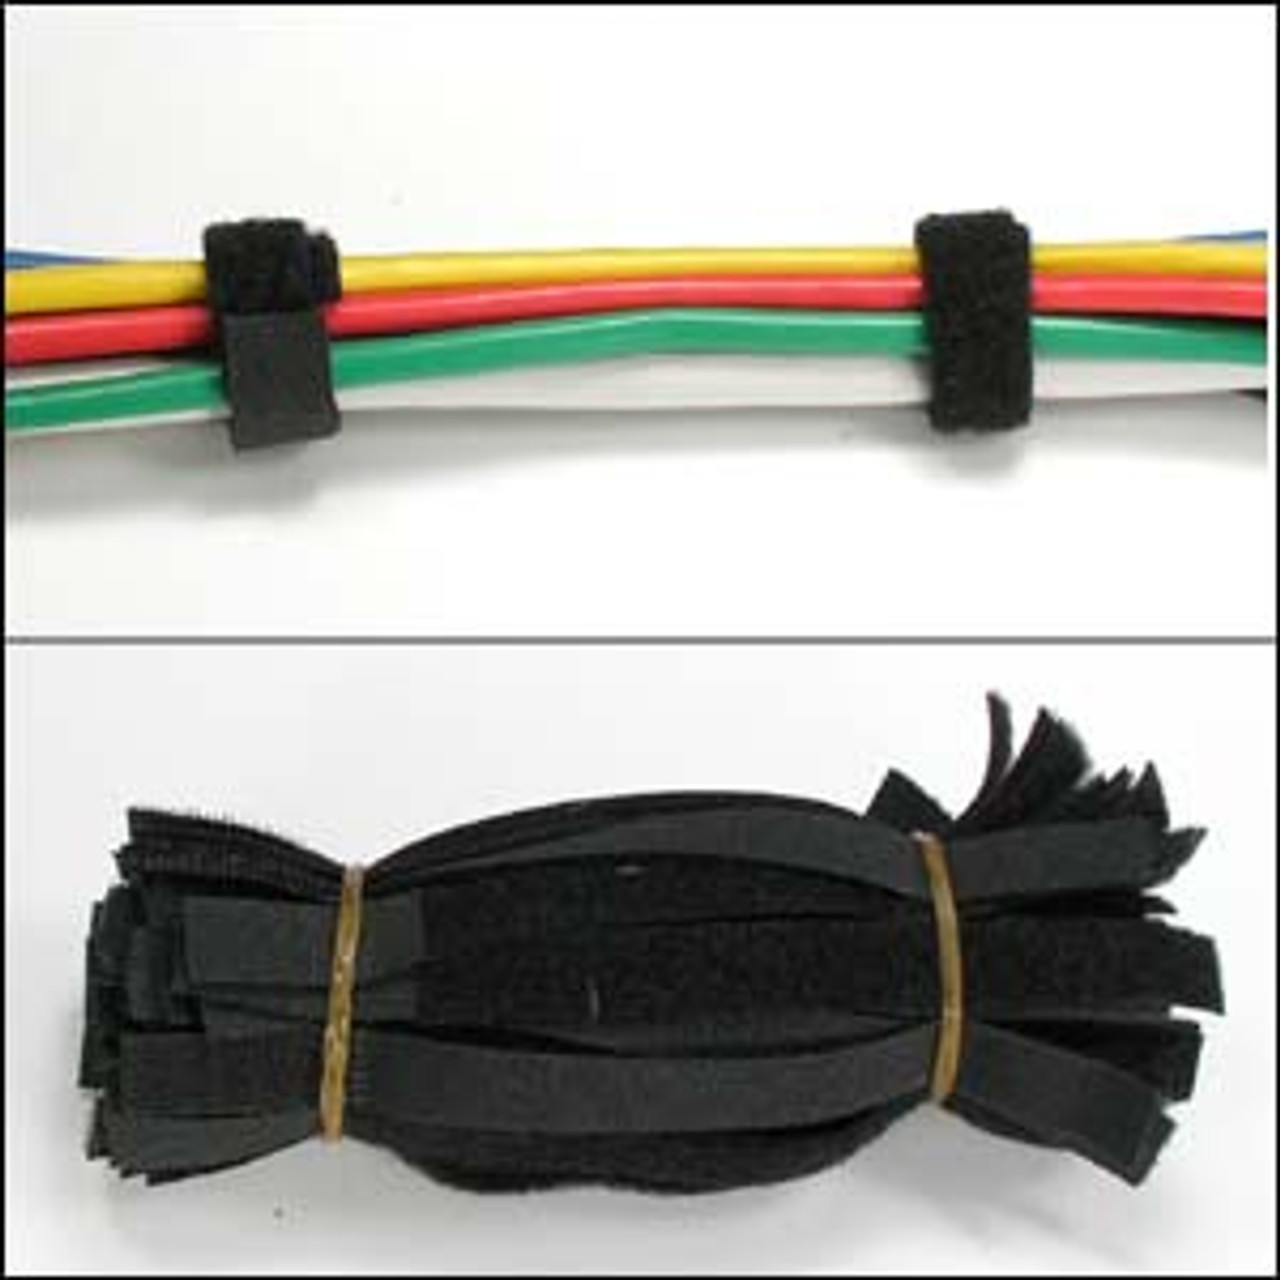 Bulk roll of Black - 1/2 inch wide Velcro Cable Tie